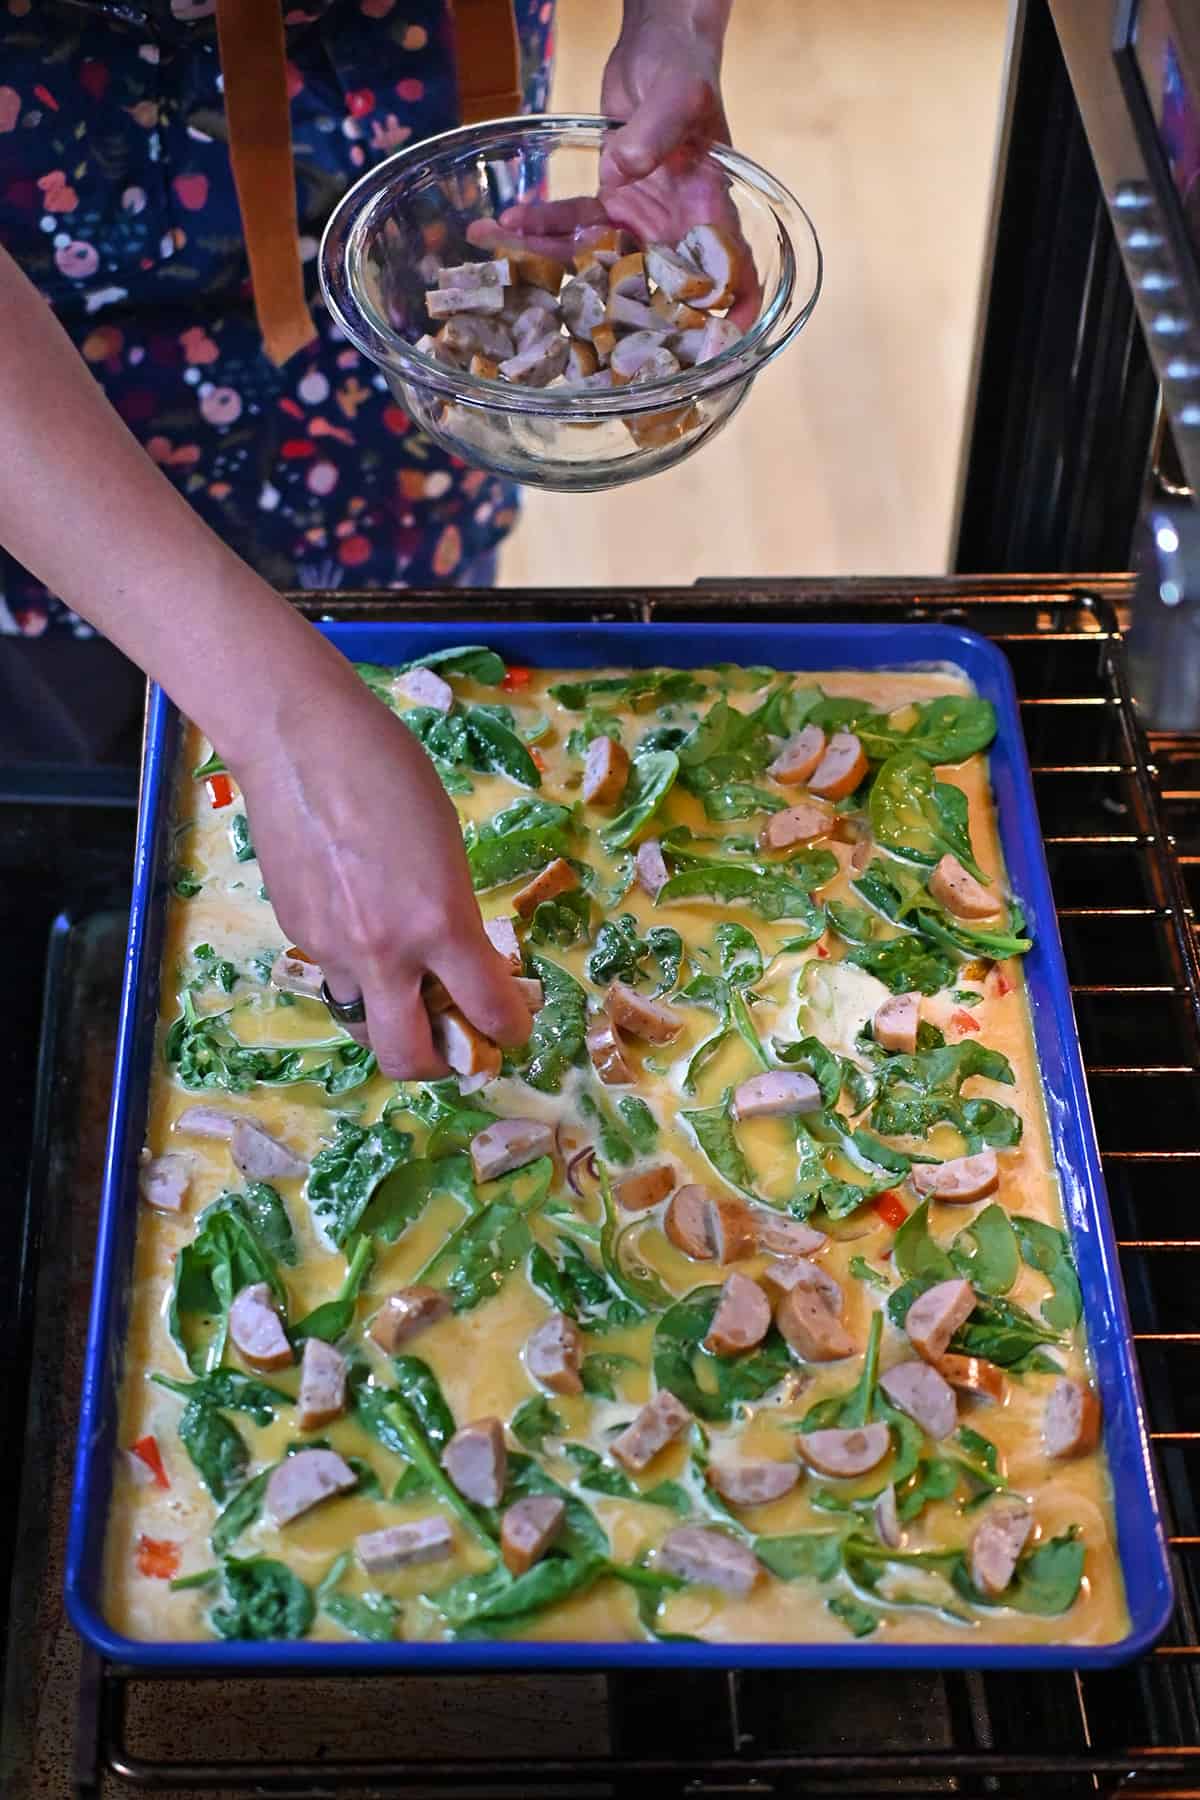 A hand is placing thinly sliced chicken apple sausage onto an unbaked blue sheet pan filled with raw scrambled eggs and vegetables in an open oven.